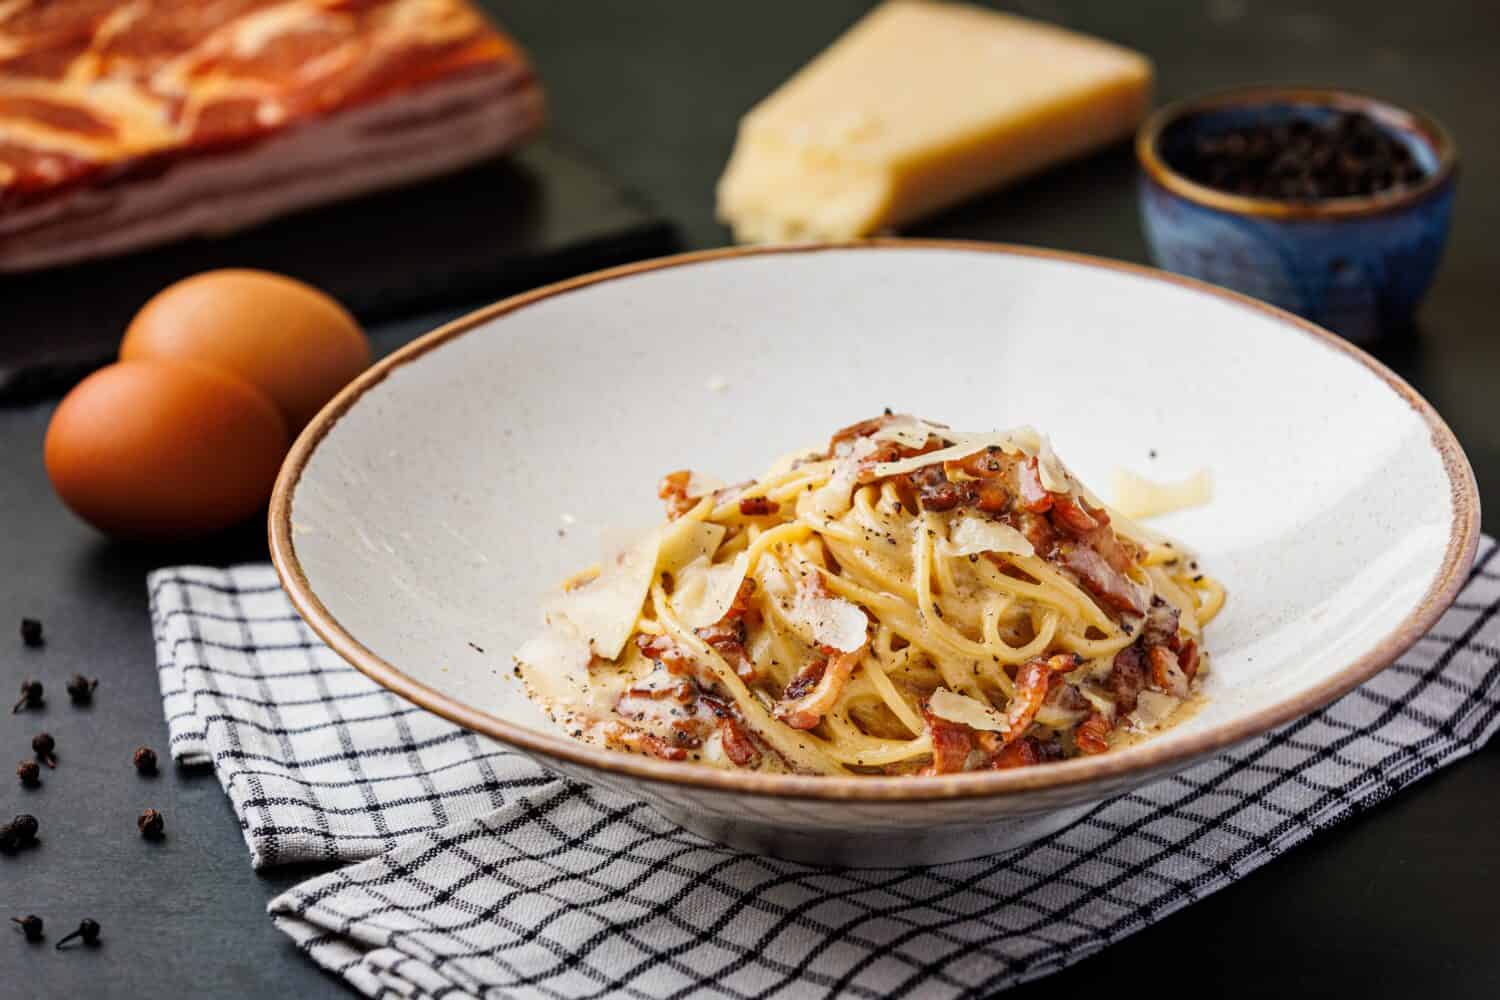 Pasta Carbonara - Italian pasta dish, traditionally done with only 4 ingredients - parmesan cheese, guanciale or pancetta, eggs and black pepper.